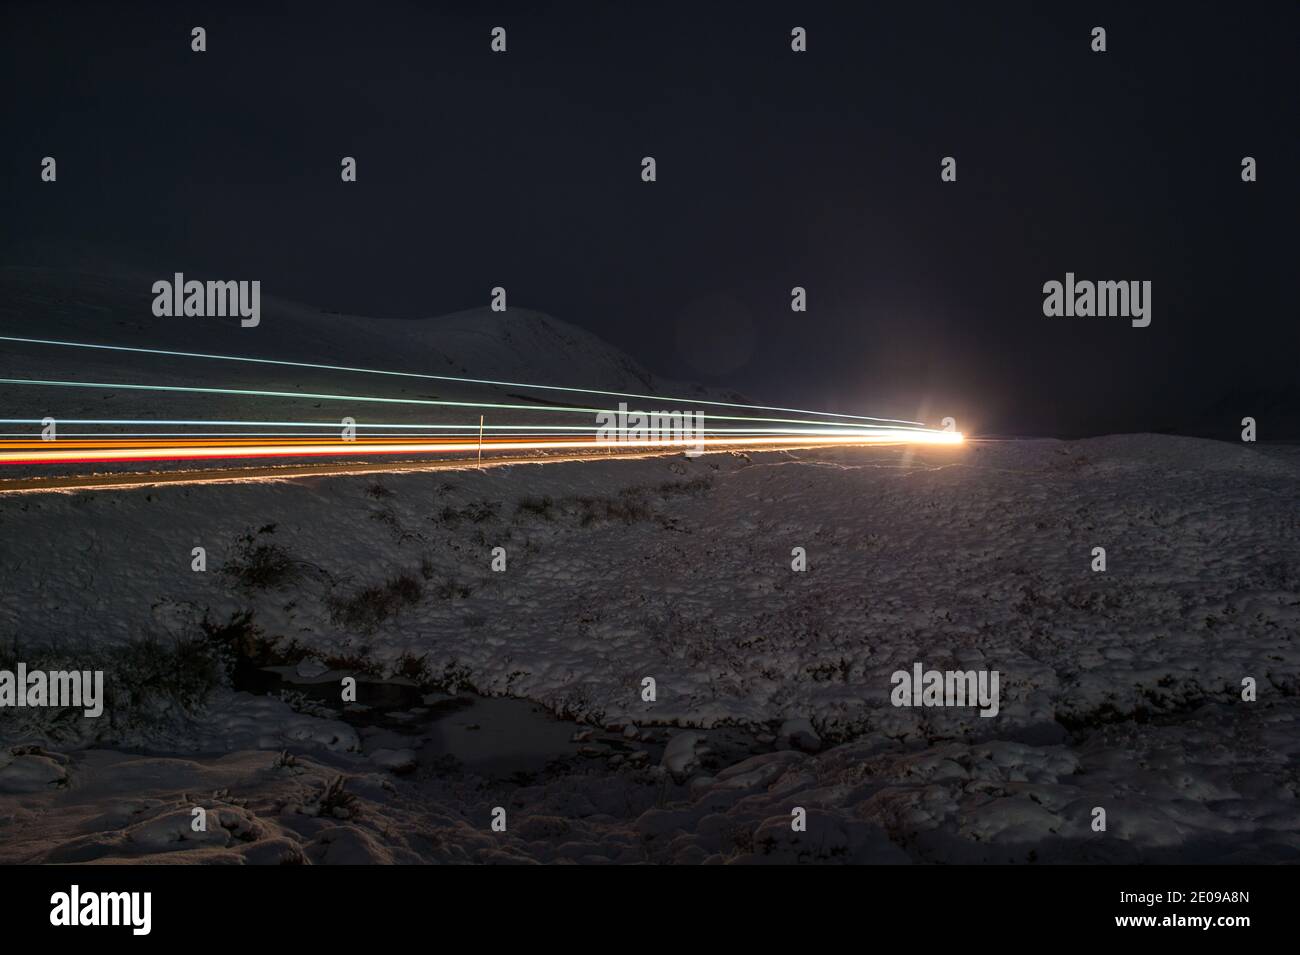 Glencoe, Scotland, UK. 30th Dec, 2020. Pictured: The A82 seen with a solitary vehicle at night under the waning fall moon. The snow reflects back the light causing a dramatic night image. Yellow snow warning in place as more snow with freezing temperatures expected again overnight. Credit: Colin Fisher/Alamy Live News Stock Photo